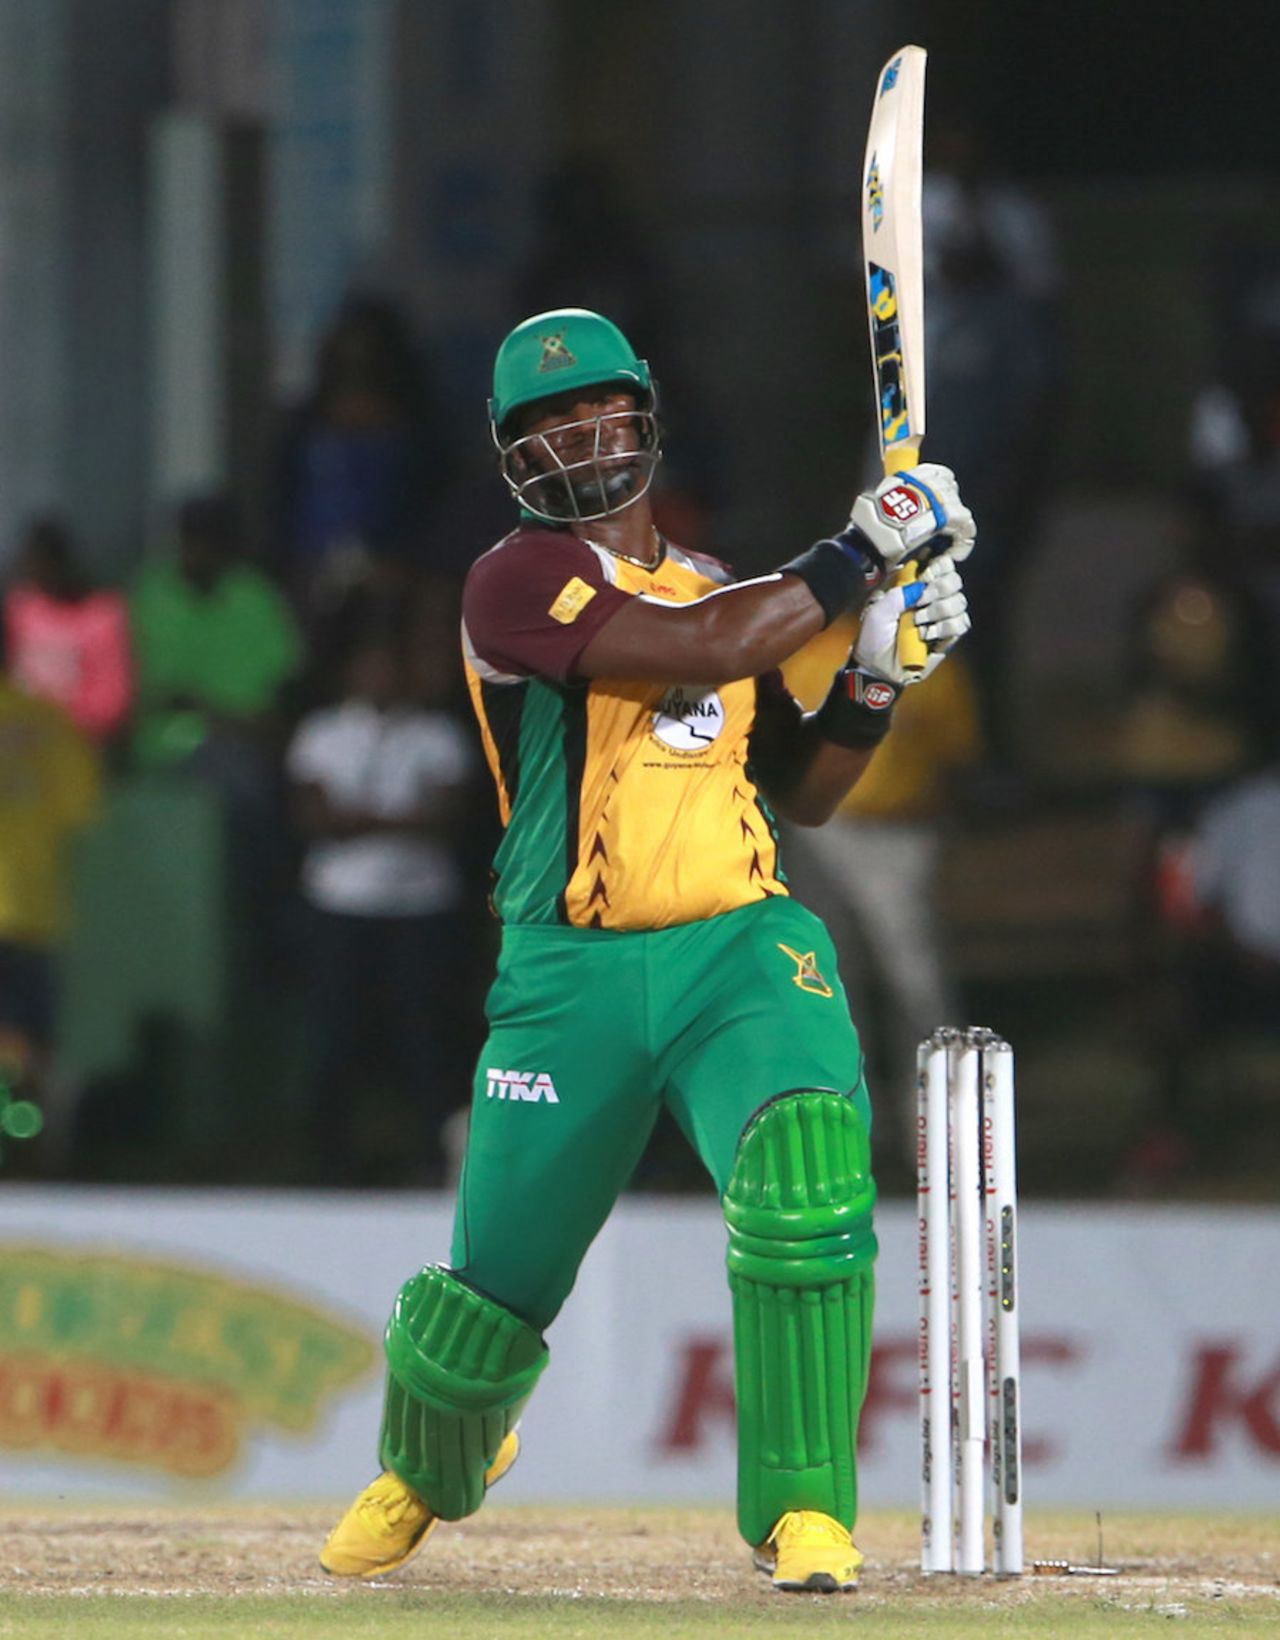 Dwayne Smith was brutal on the leg side, St Kitts and Nevis Patriots v Guyana Amazon Warriors, CPL 2016, Basseterre, June 30, 2016